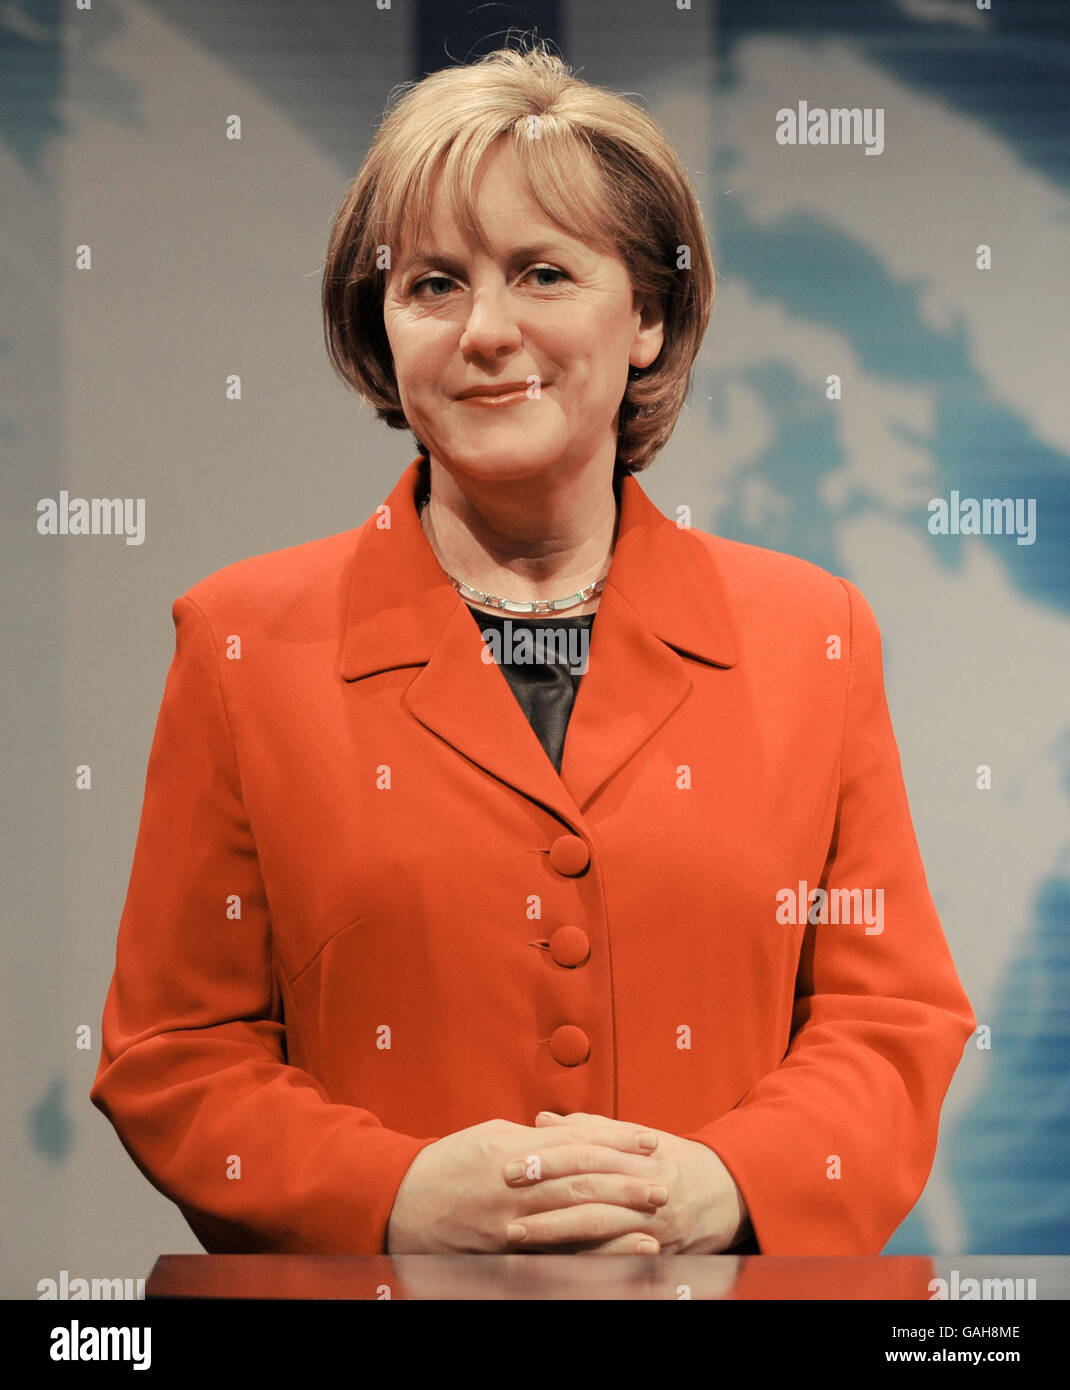 A wax figure of German Chancellor Angela Merkel is unveiled in the Political Leaders Zone of Madame Tussauds, London. Stock Photo